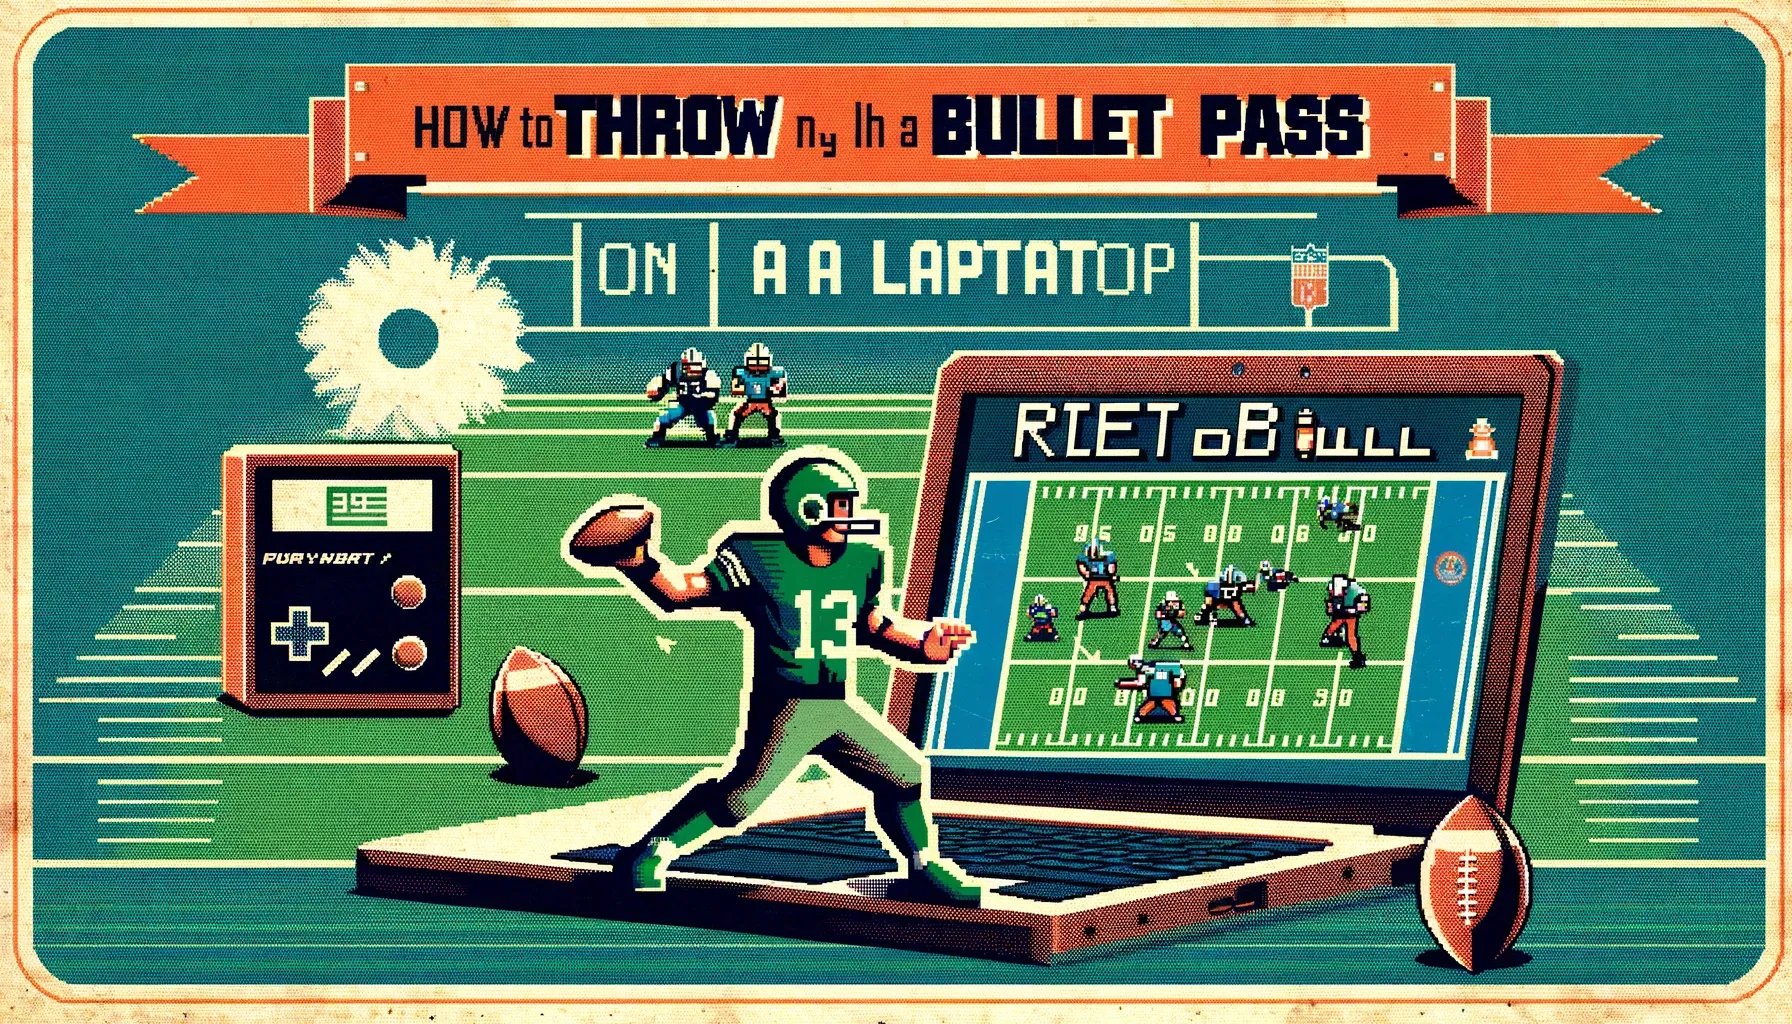 How to Throw a Bullet Pass in Retro Bowl on a Laptop